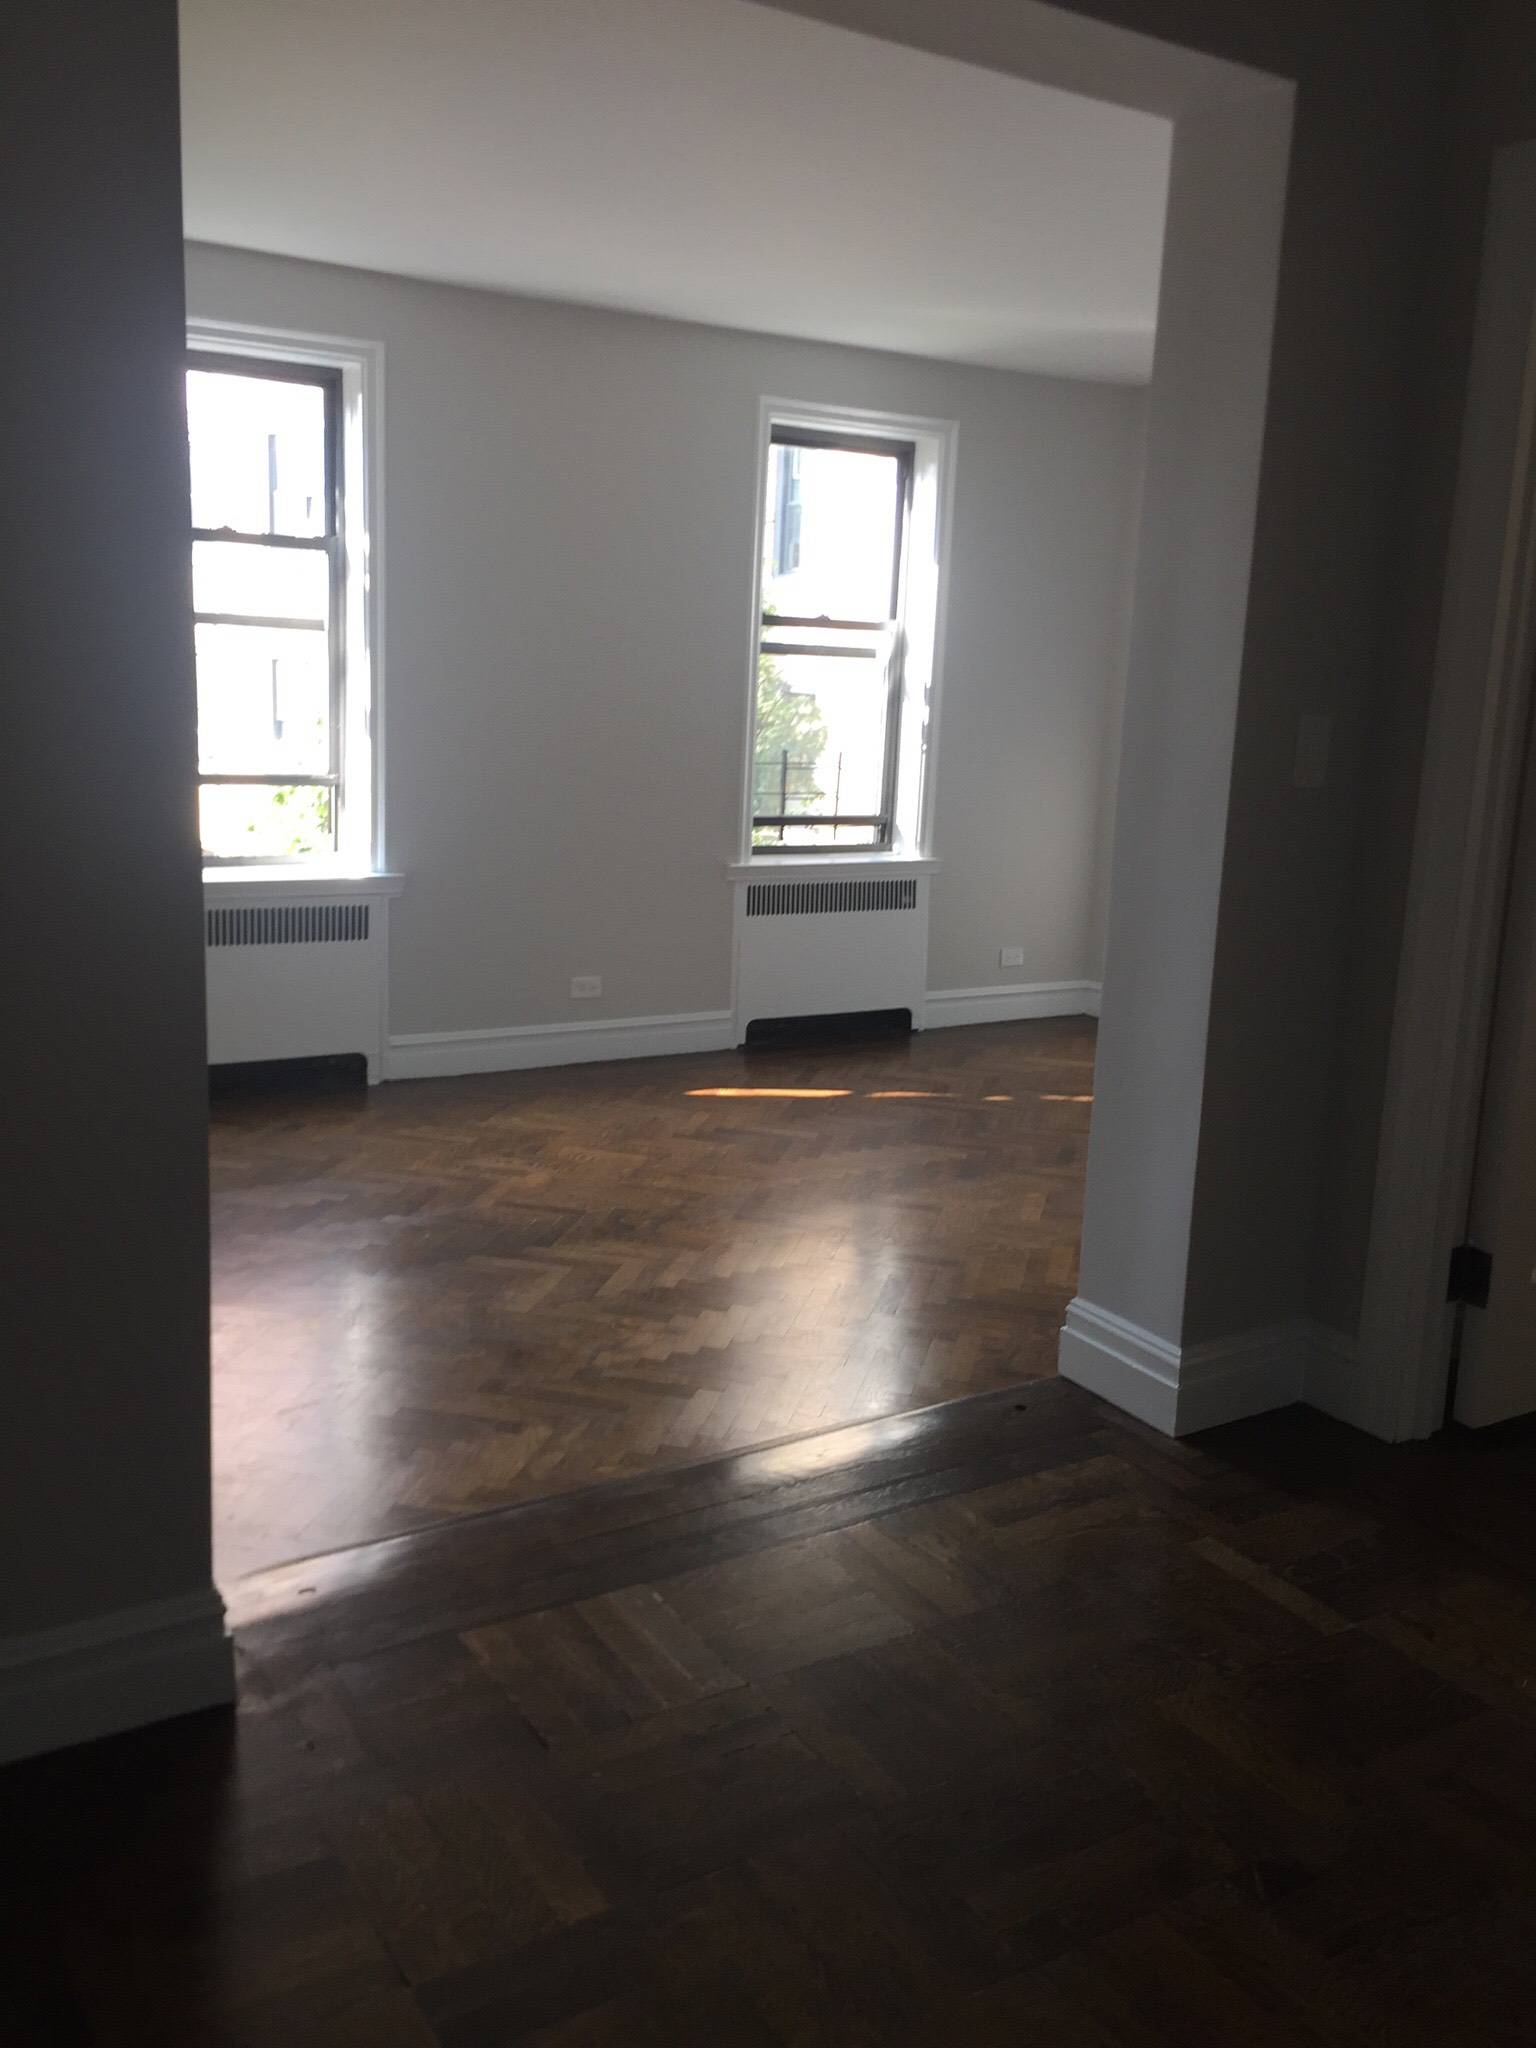 Lovely renovated unit with partial river views in a co op caliber rental building, Sunken living room, hardwood floors, dishwasher, 6 closets, laundry in building, elevator, full time live in ...